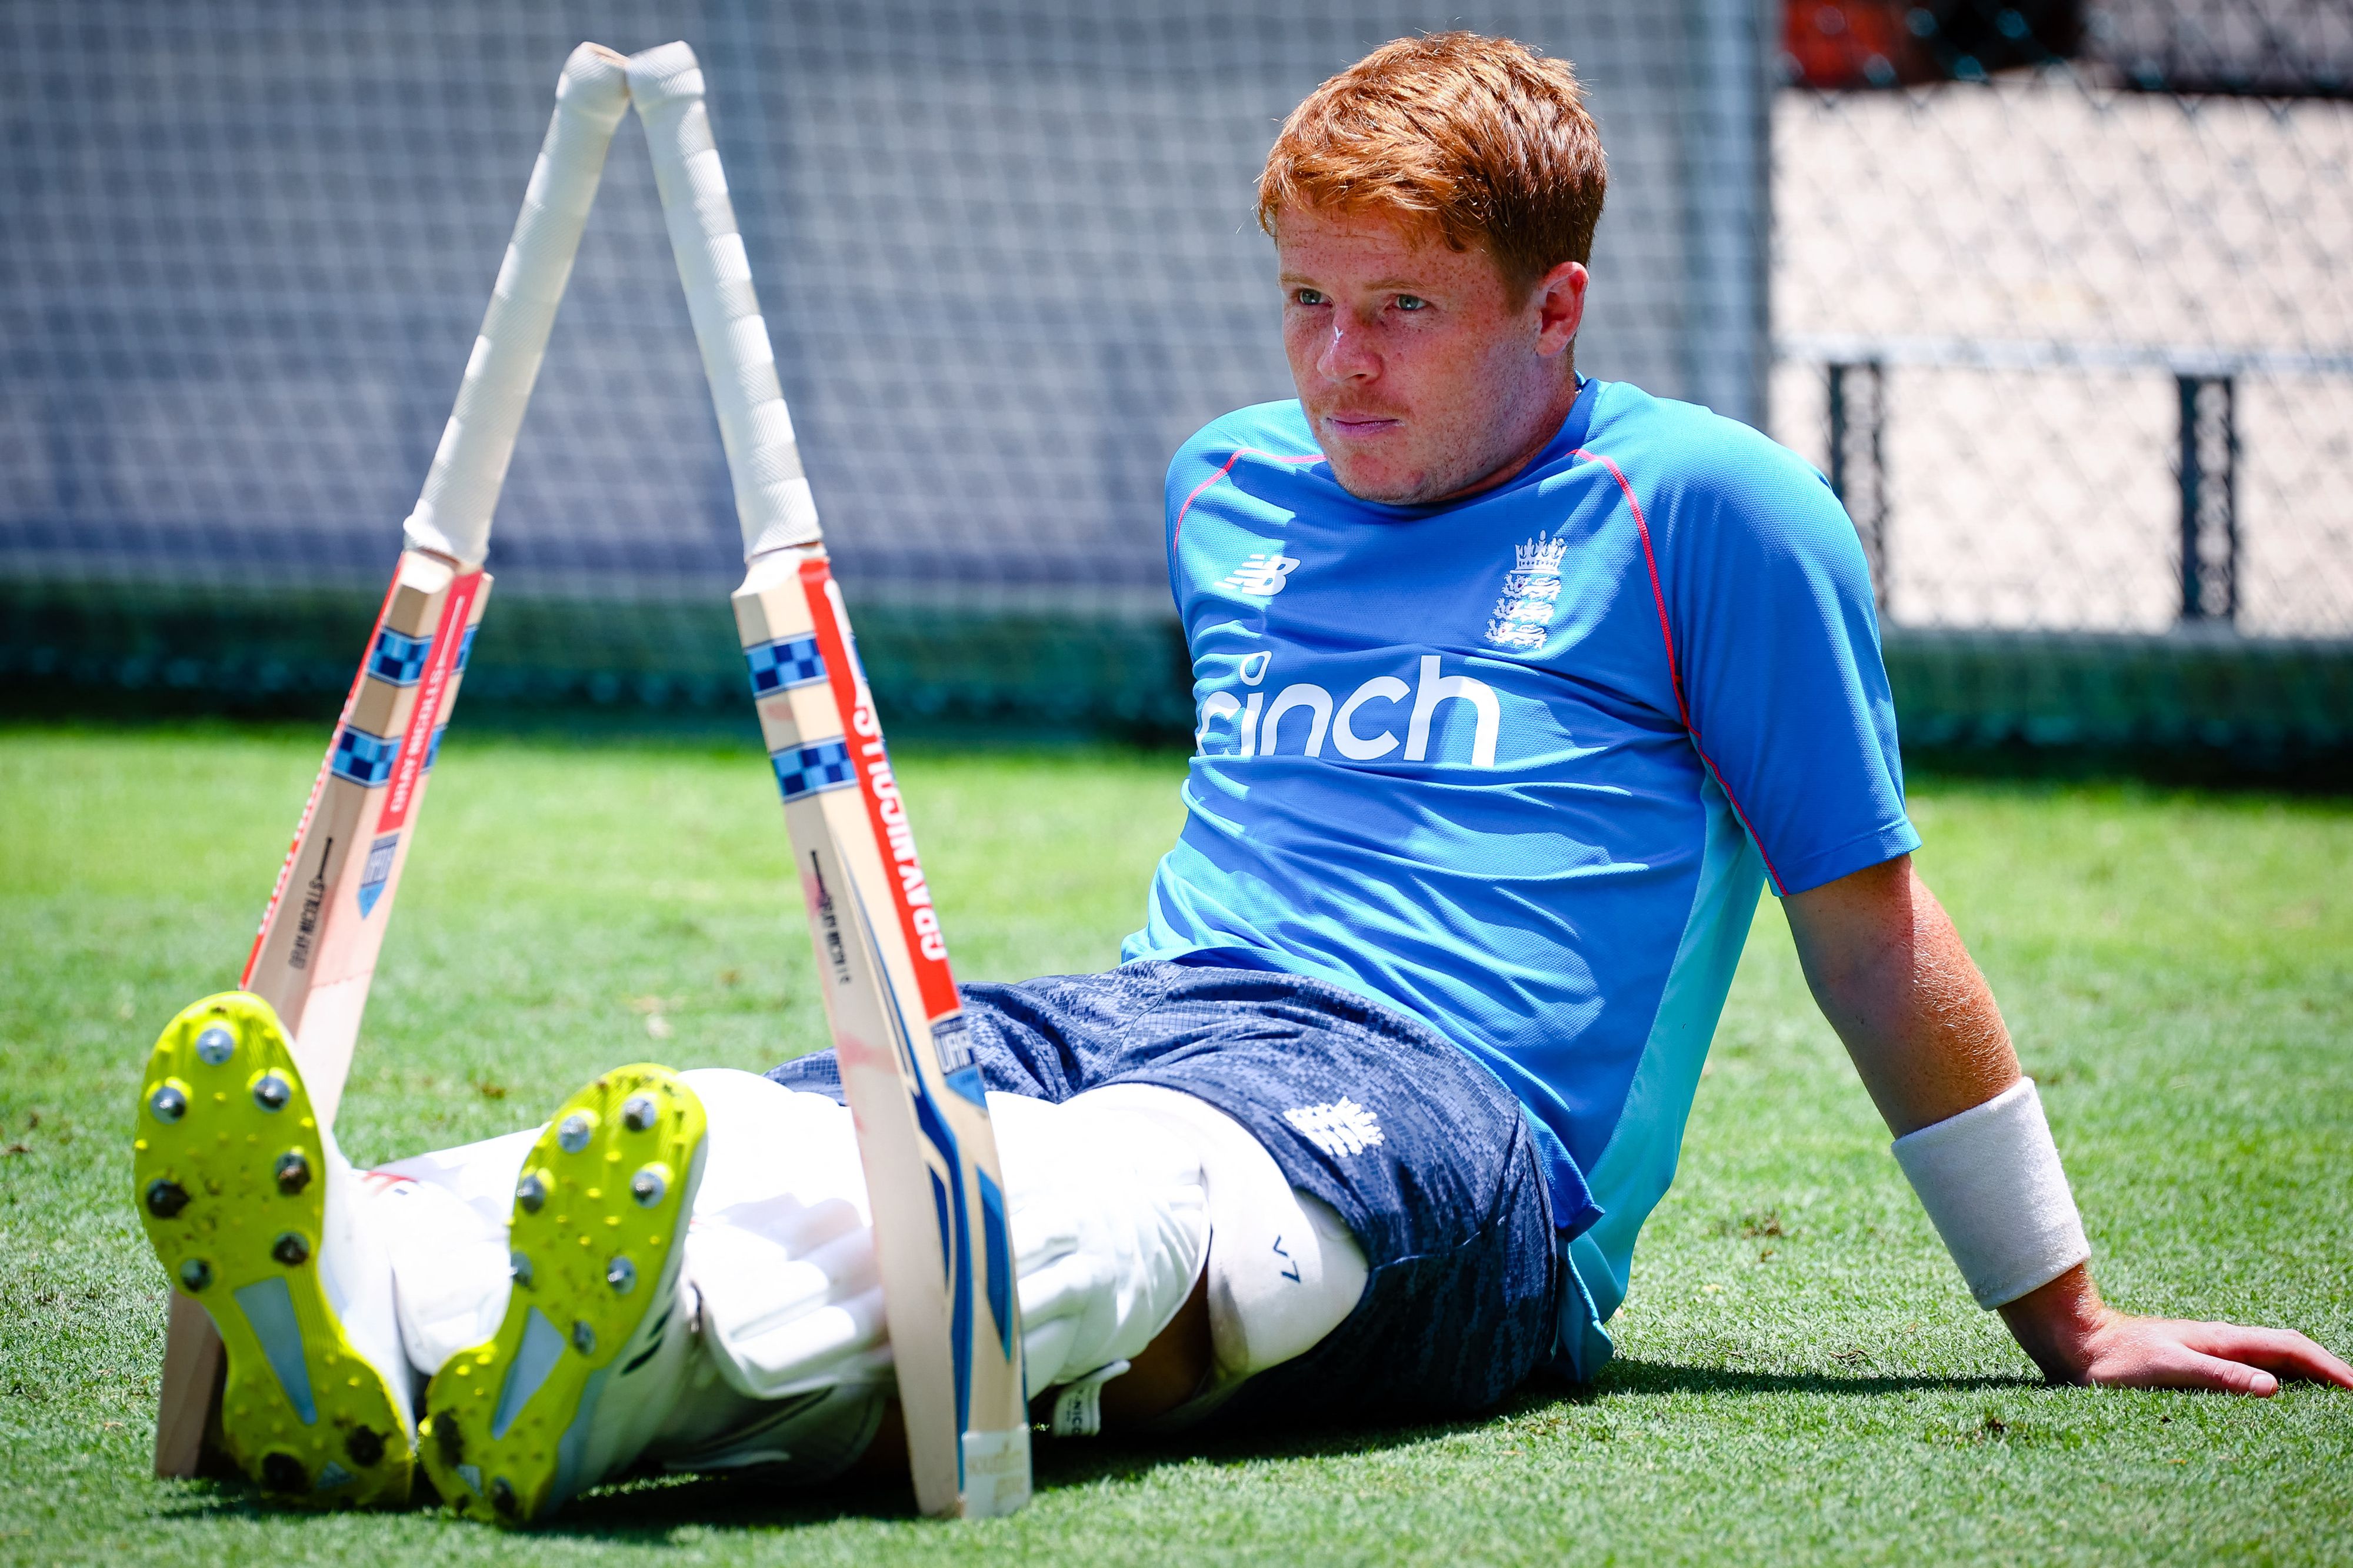 England's Ollie Pope takes a break